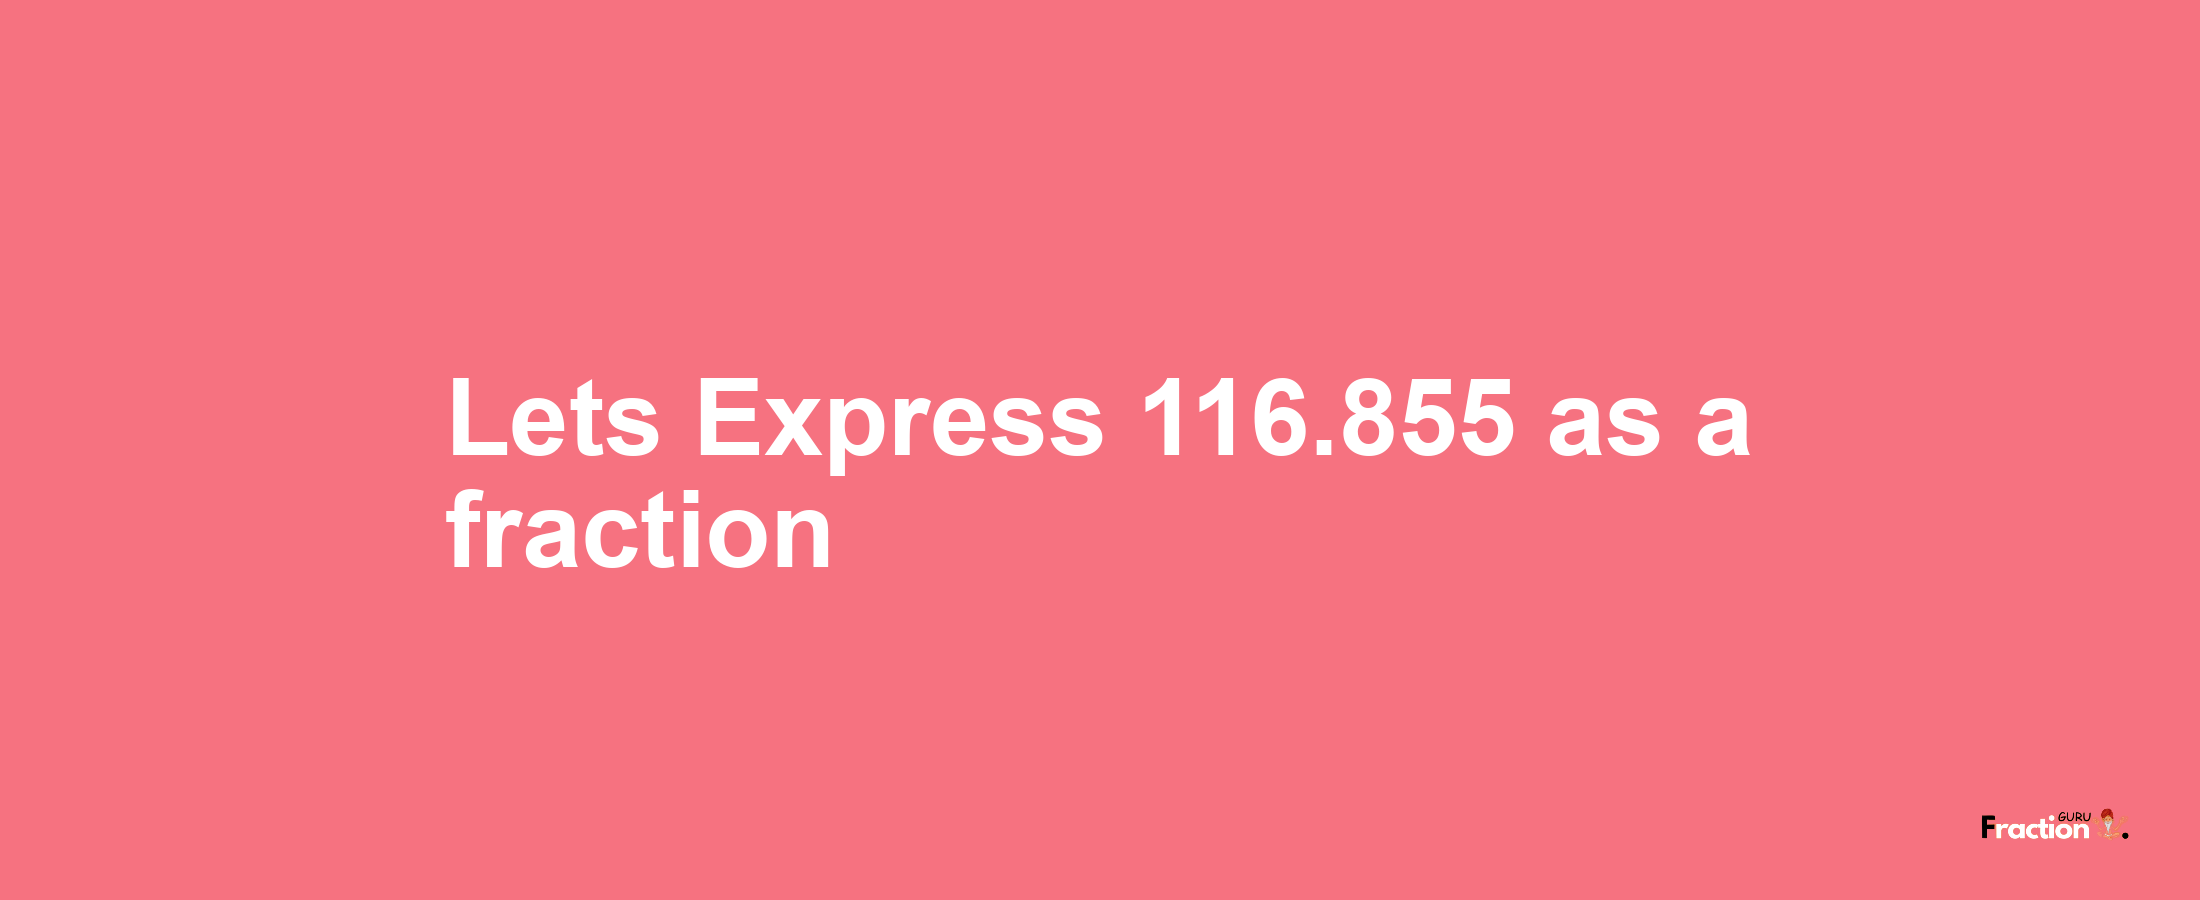 Lets Express 116.855 as afraction